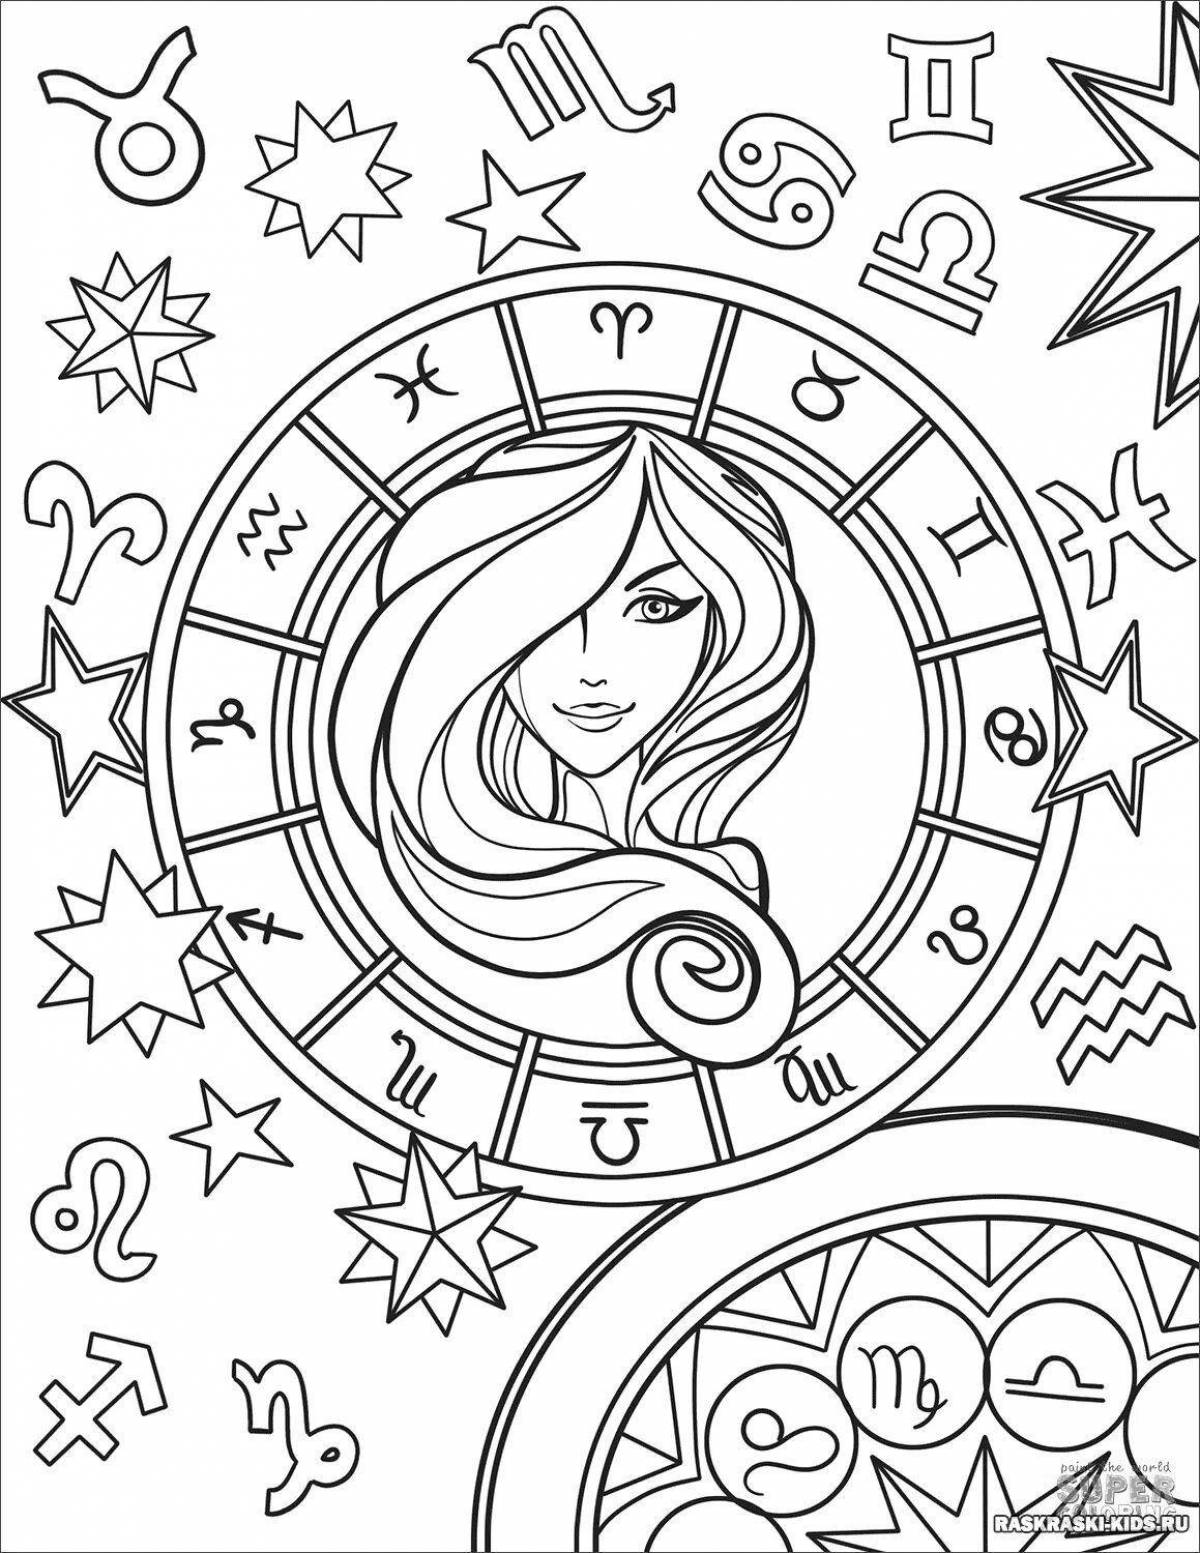 Colorful zodiac signs coloring pages for juniors